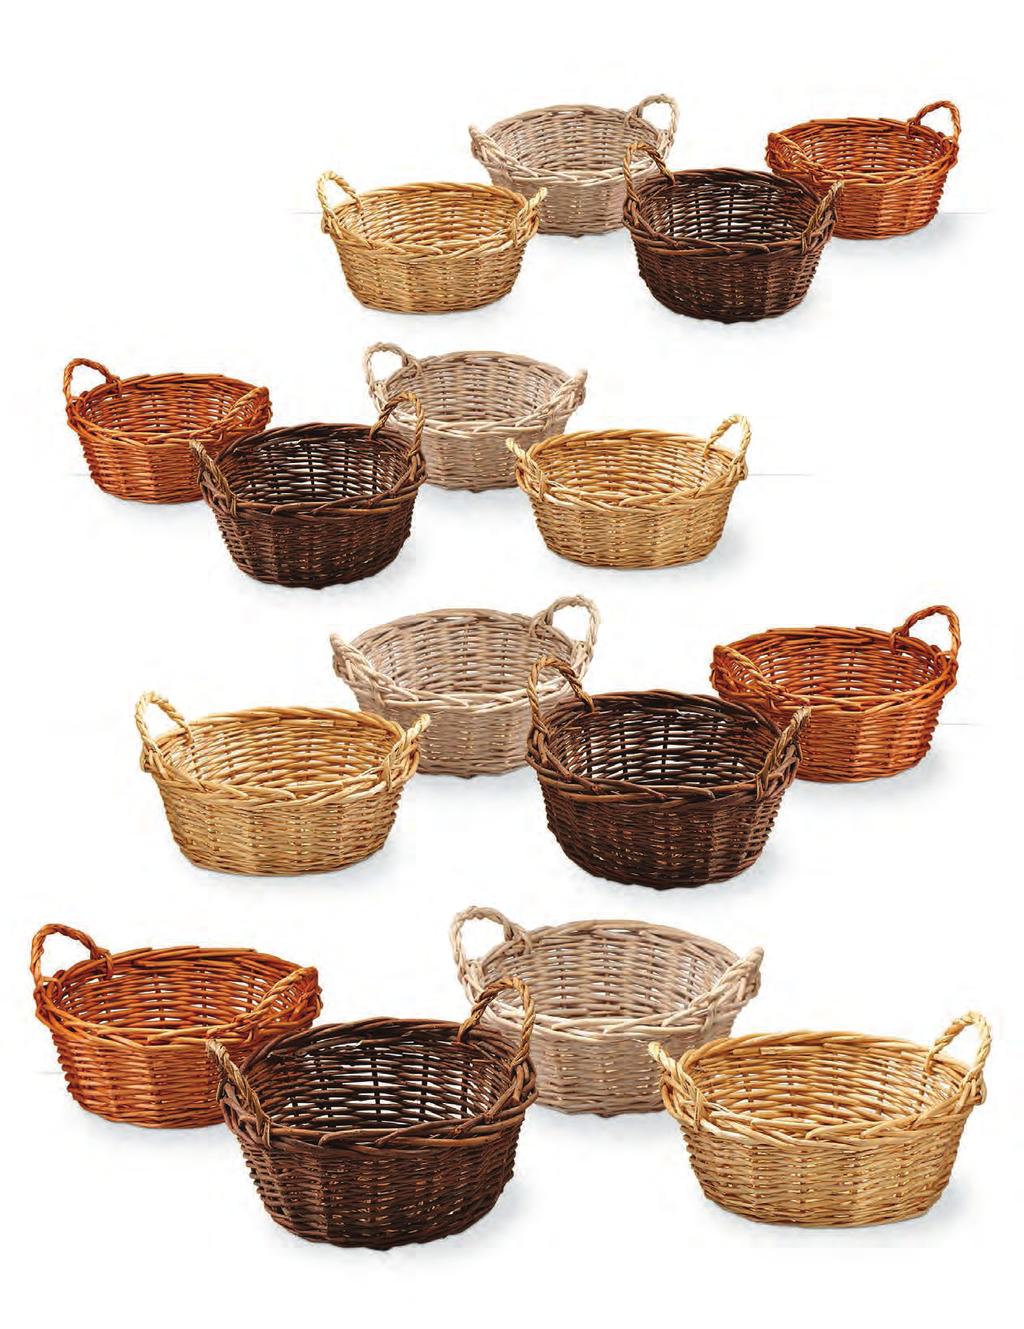 Assorted Round Willow Bowls Includes Hard Plastic Liners RO110-AST 10 x 4.75 16/$3.99 ea. RO112-AST 12 x 5.25 8/$5.99 ea. RO114-AST 14 x 7 8/$6.